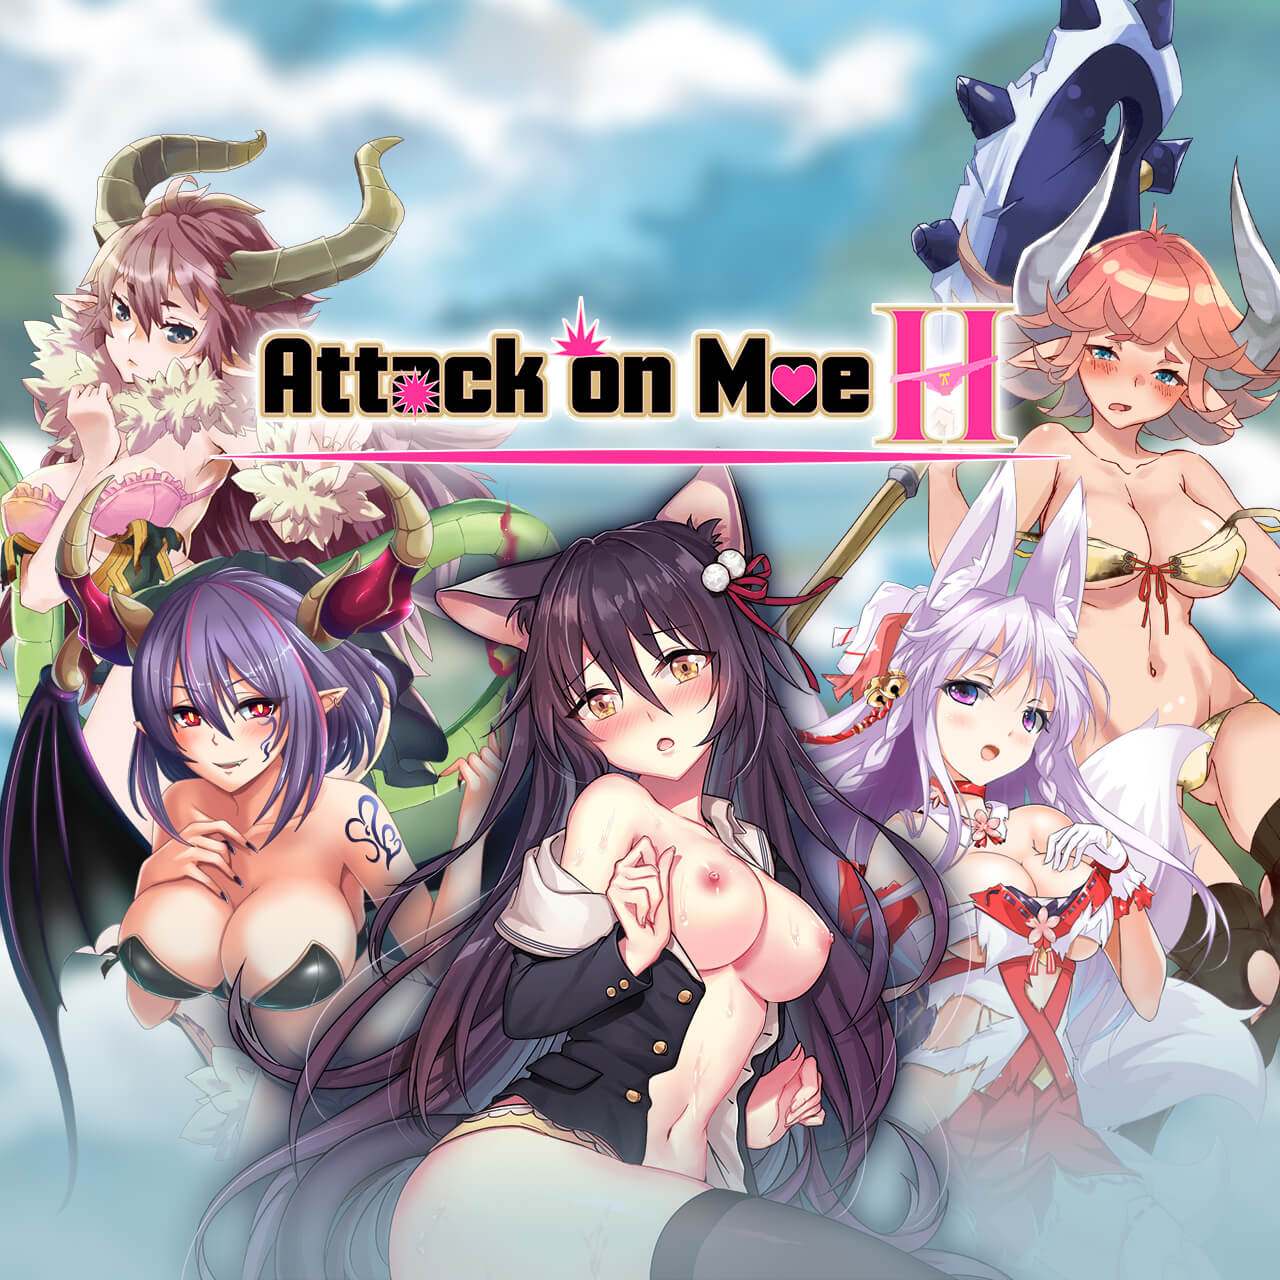 Cgaracters Lesbian Hentai Game - Attack On Moe H - Clicker Sex Game with APK file | Nutaku